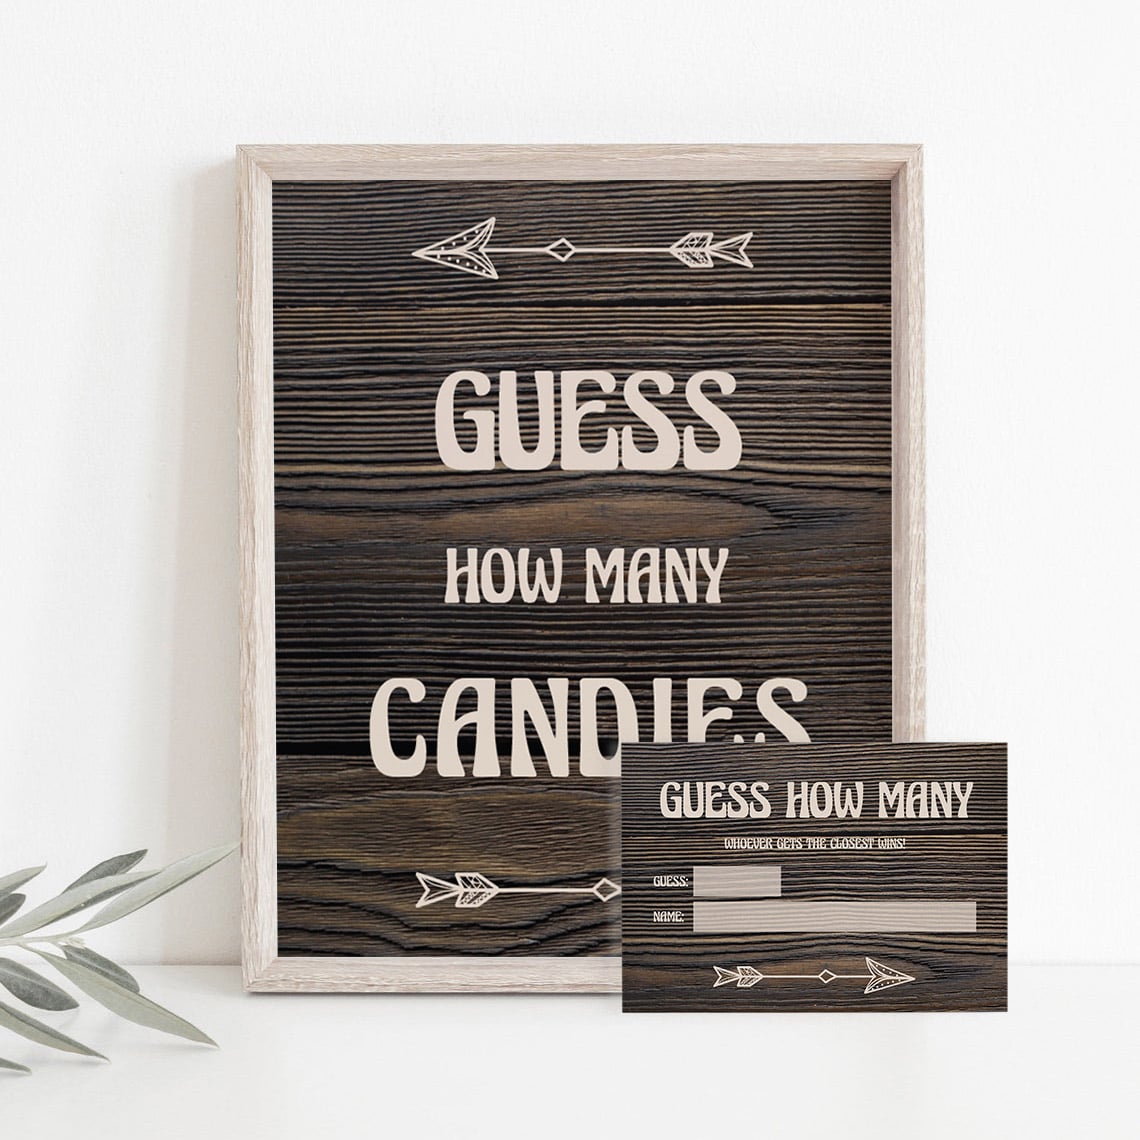 Guess how many game sign and cards rustic theme by LittleSizzle